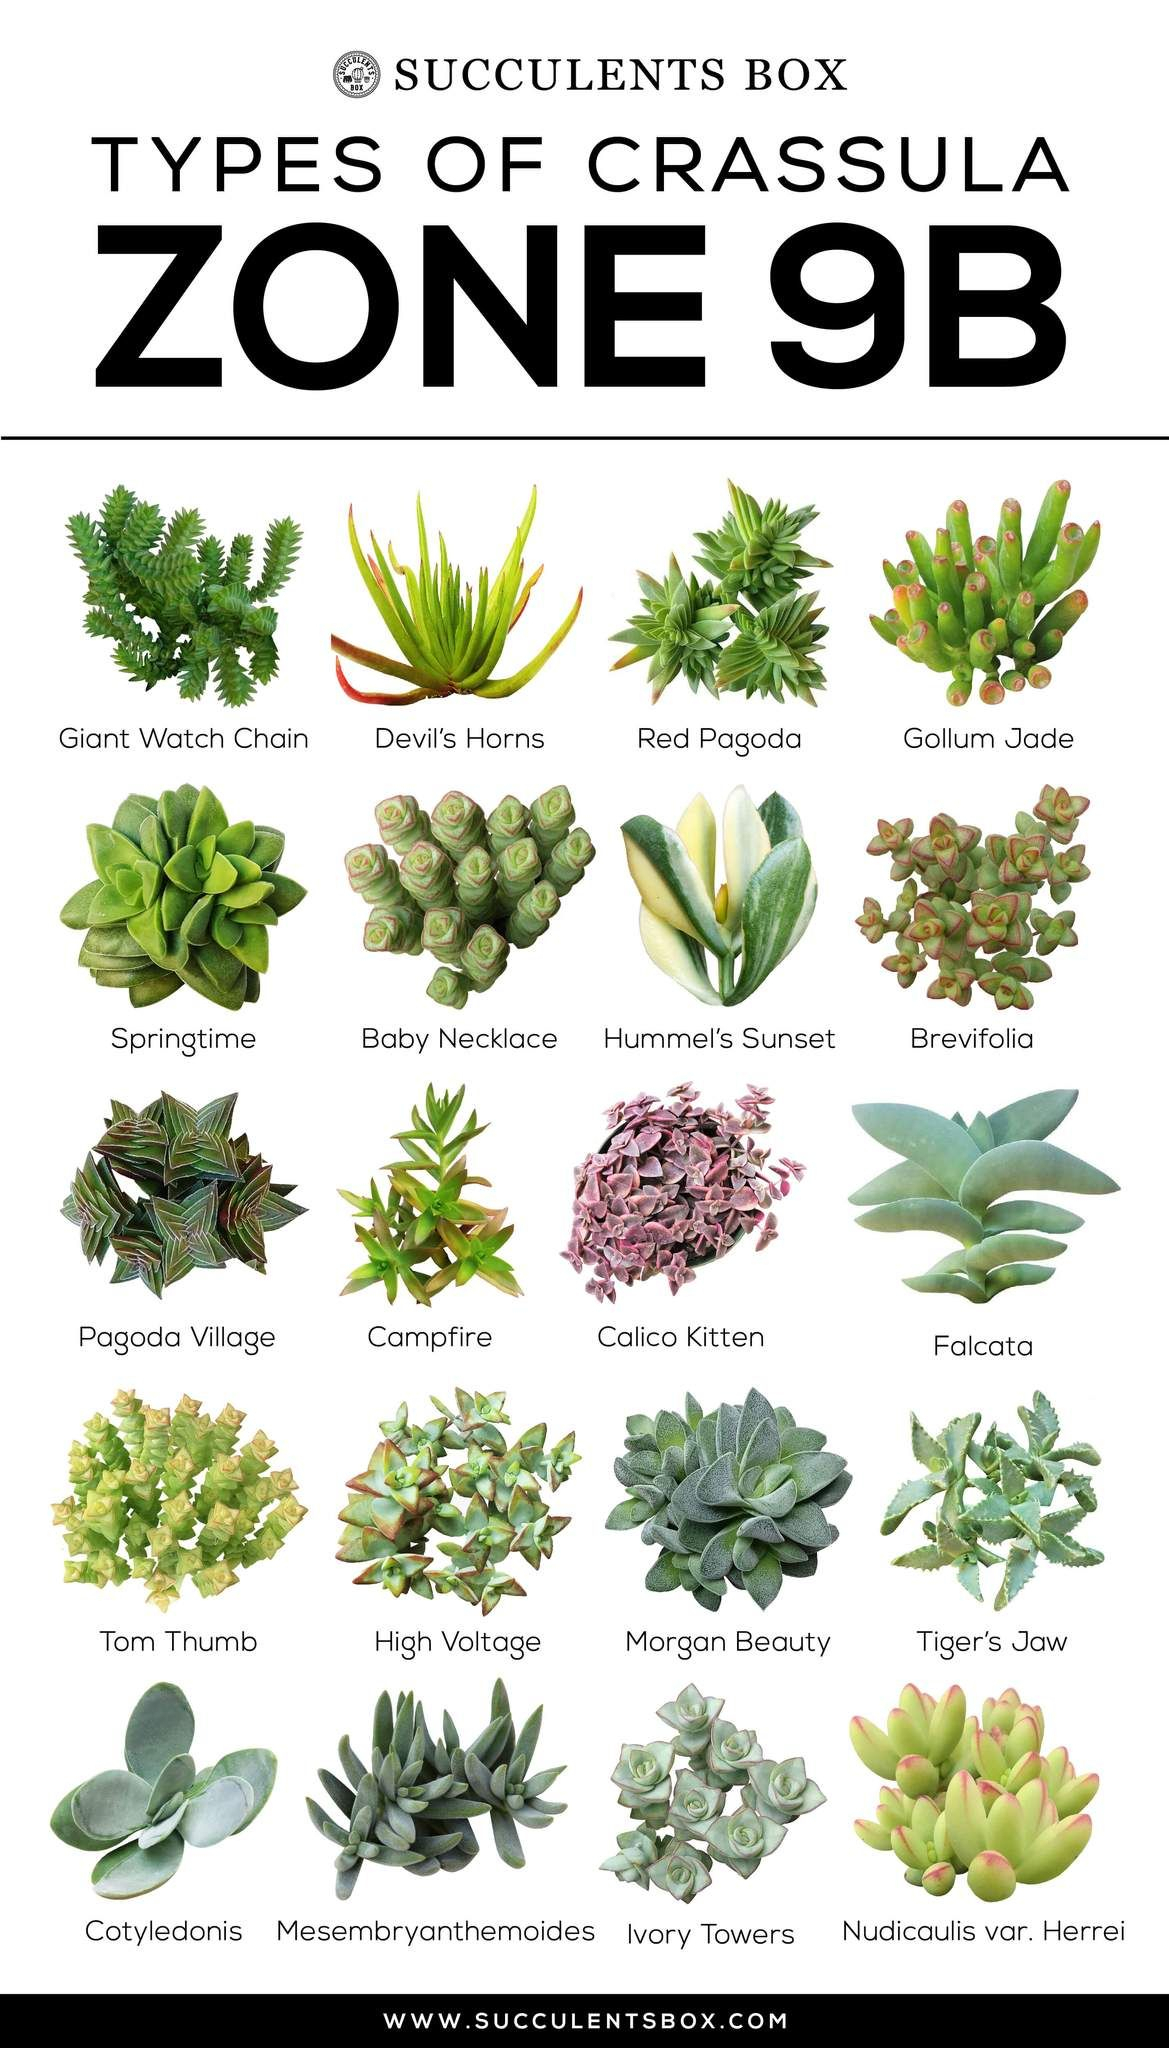 Succulents Names And Images  Succulent Plant regarding Flowers And Their Botanical Names